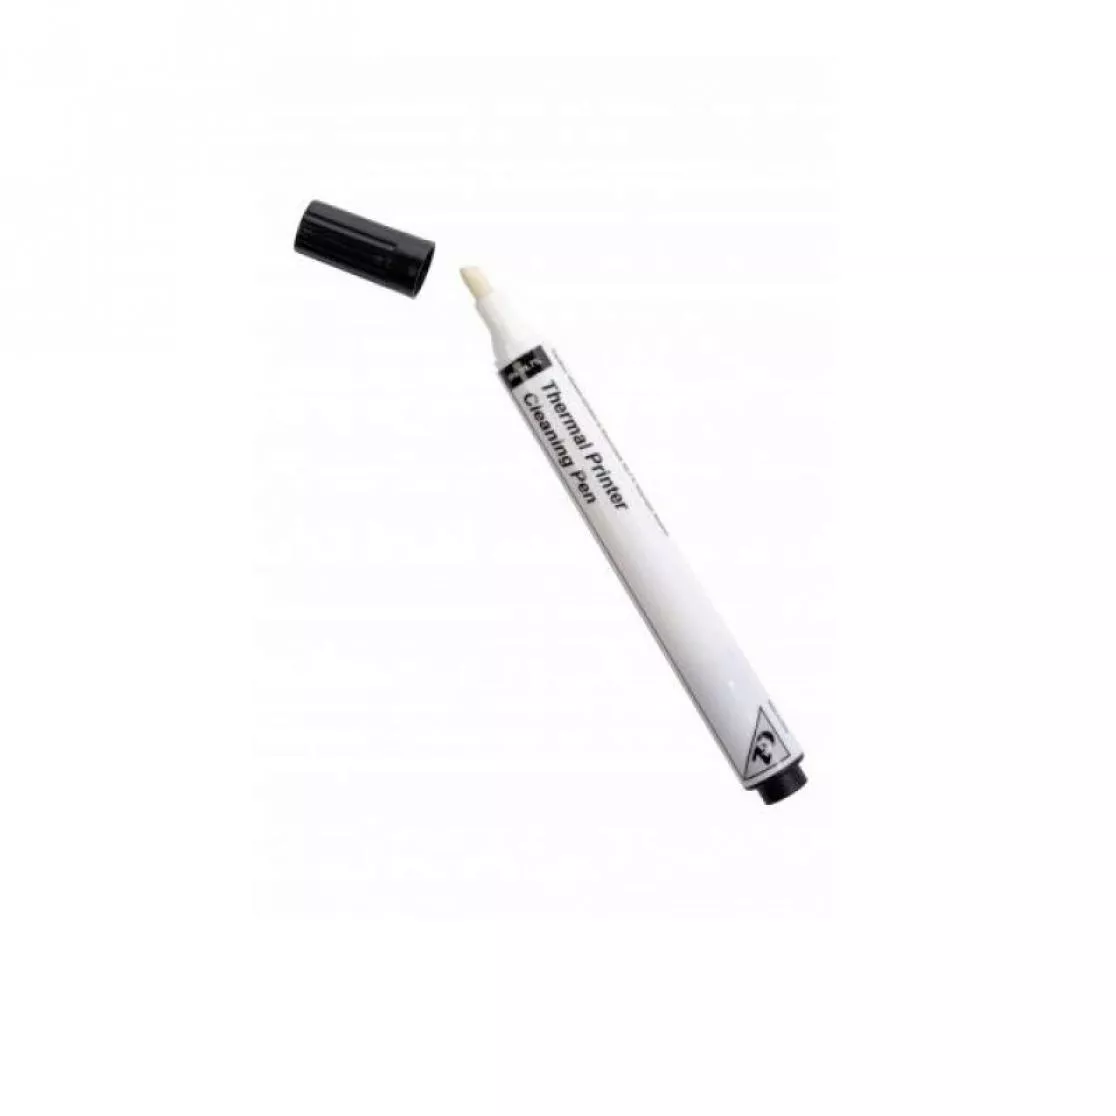 Cleaning Pen for Hiti card printers